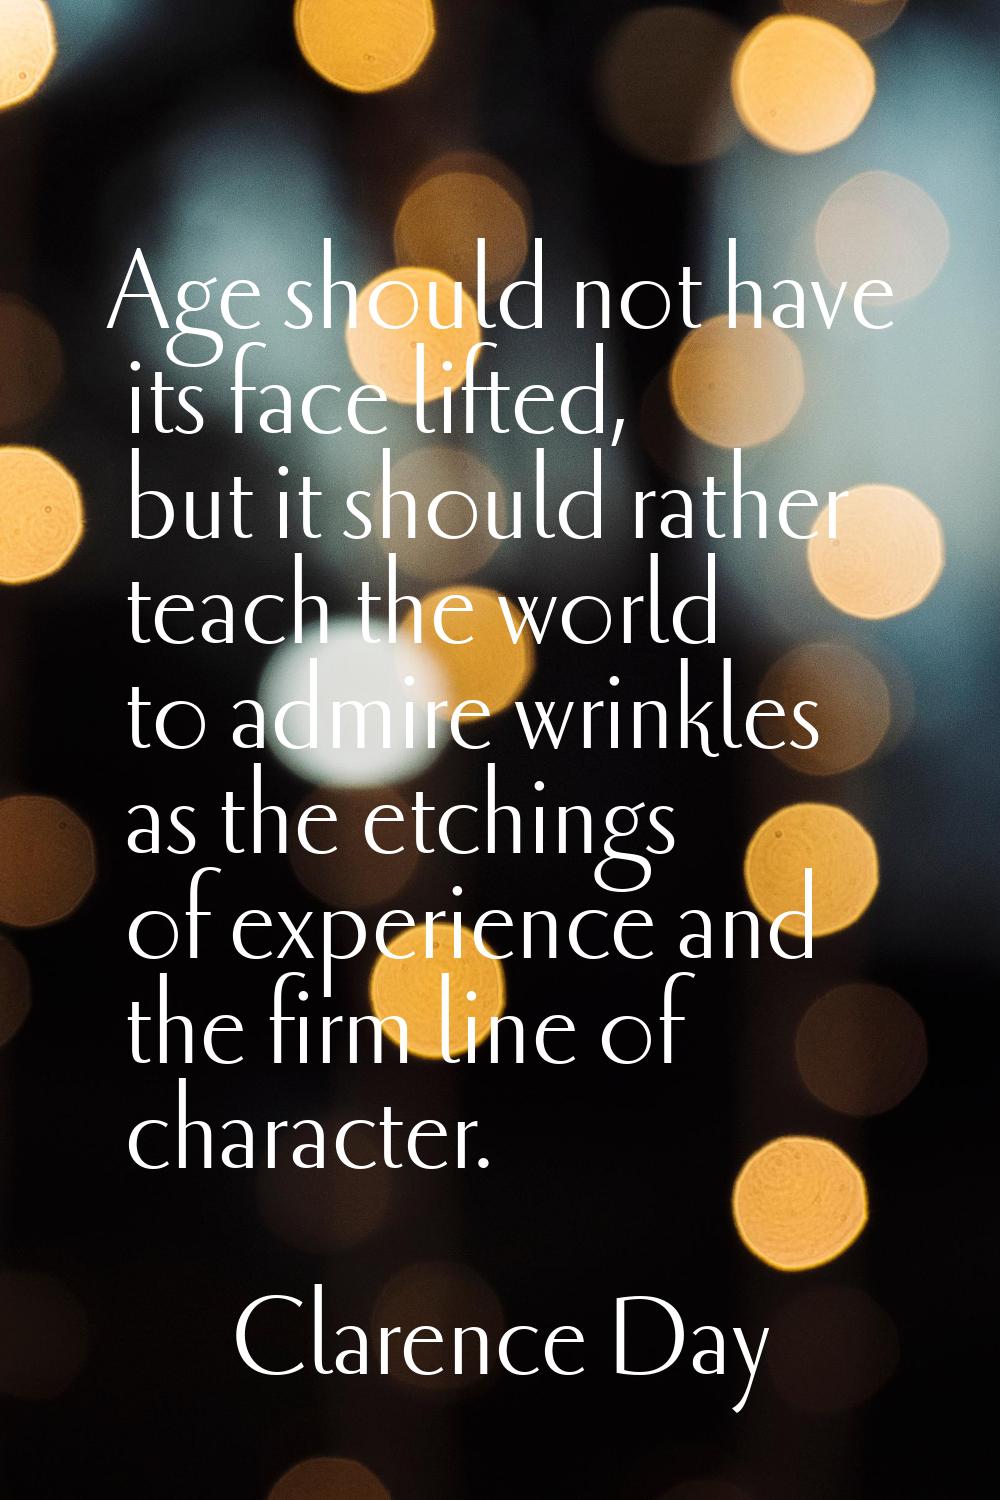 Age should not have its face lifted, but it should rather teach the world to admire wrinkles as the